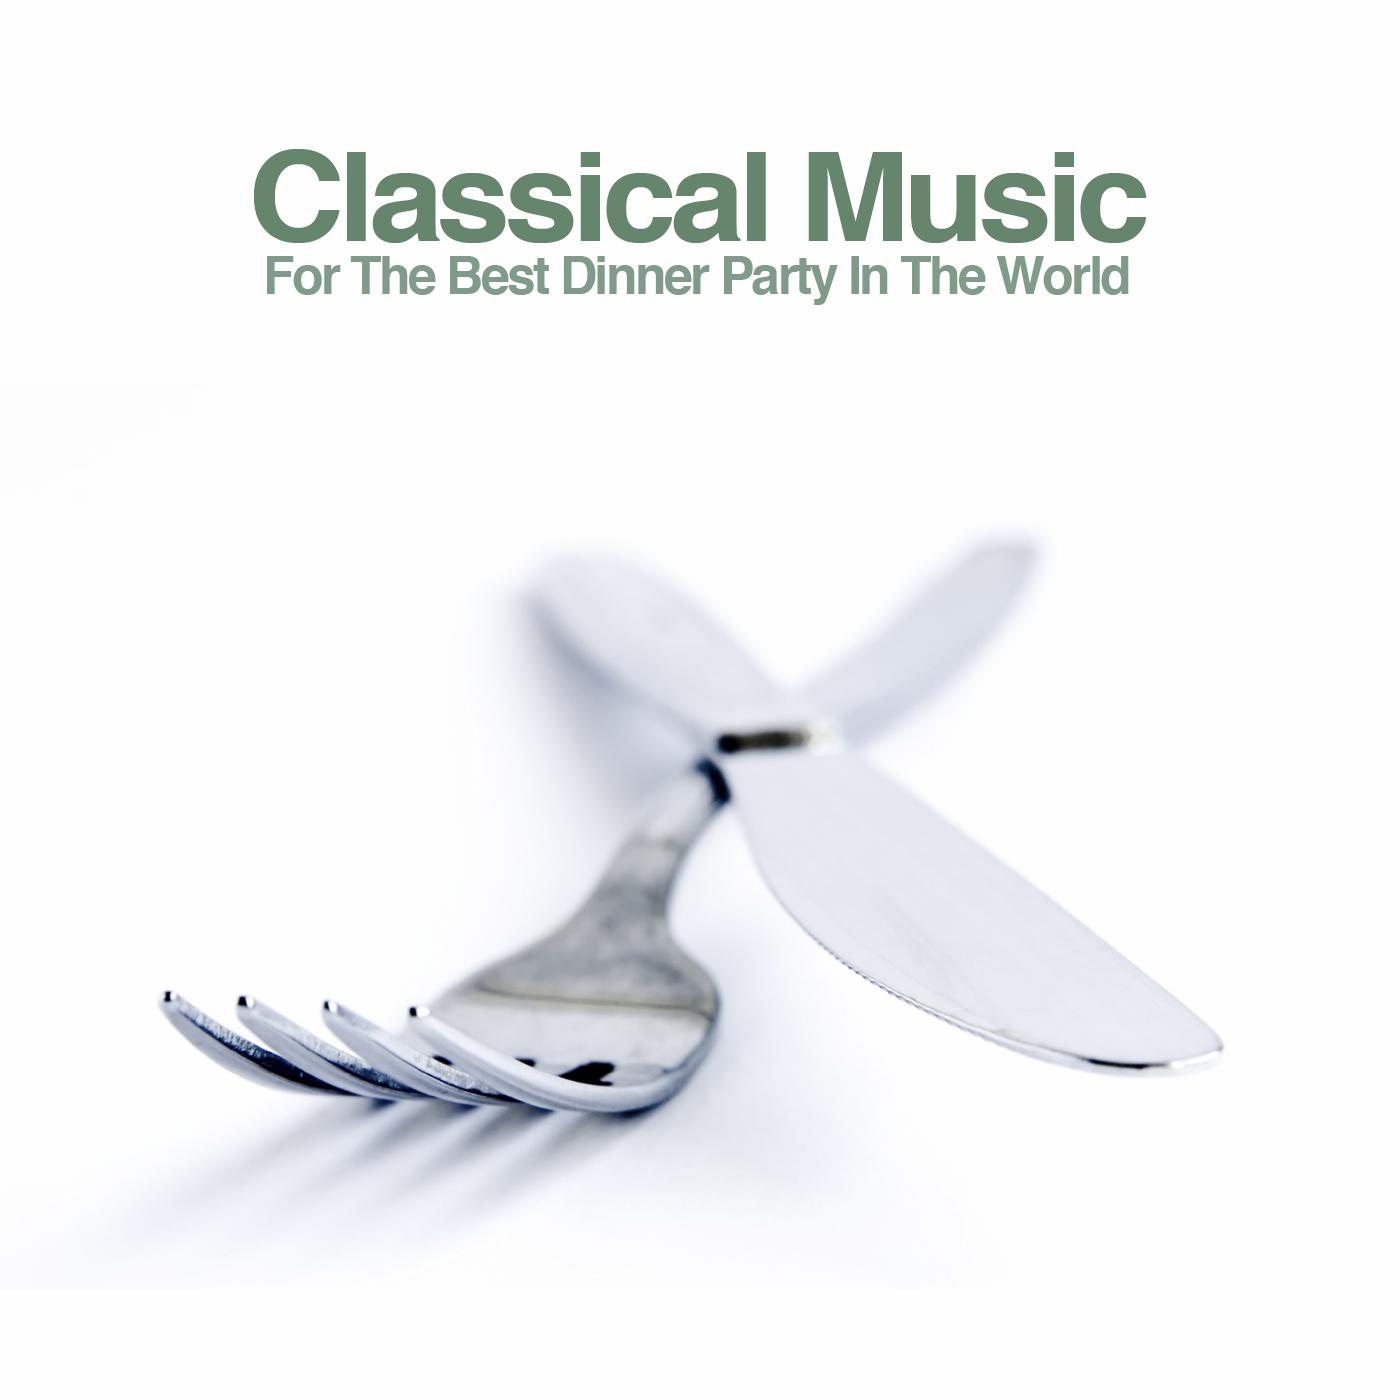 Classical Music for the Best Dinner Party in the World: Create An Instant Sophisticated Atmosphere With the Finest of Classical Pieces